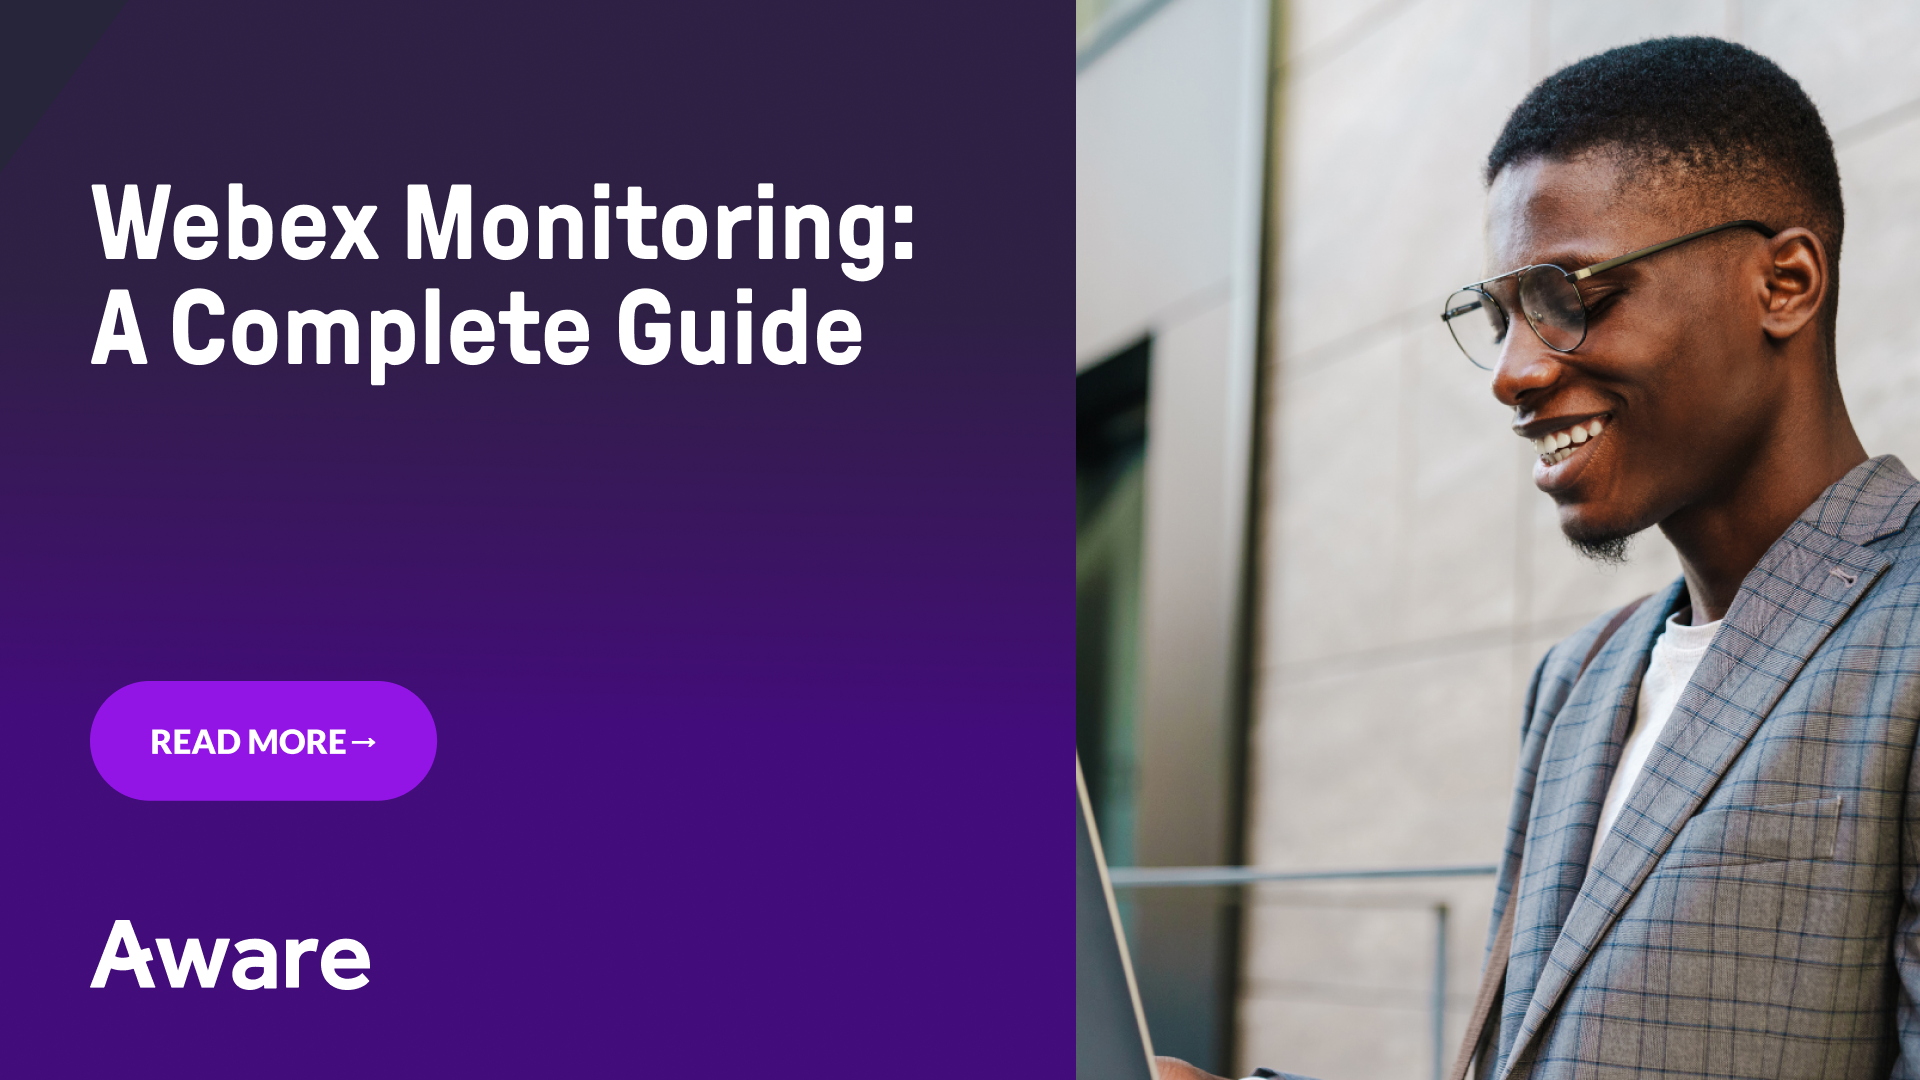  Webex Monitoring: A Complete Guide